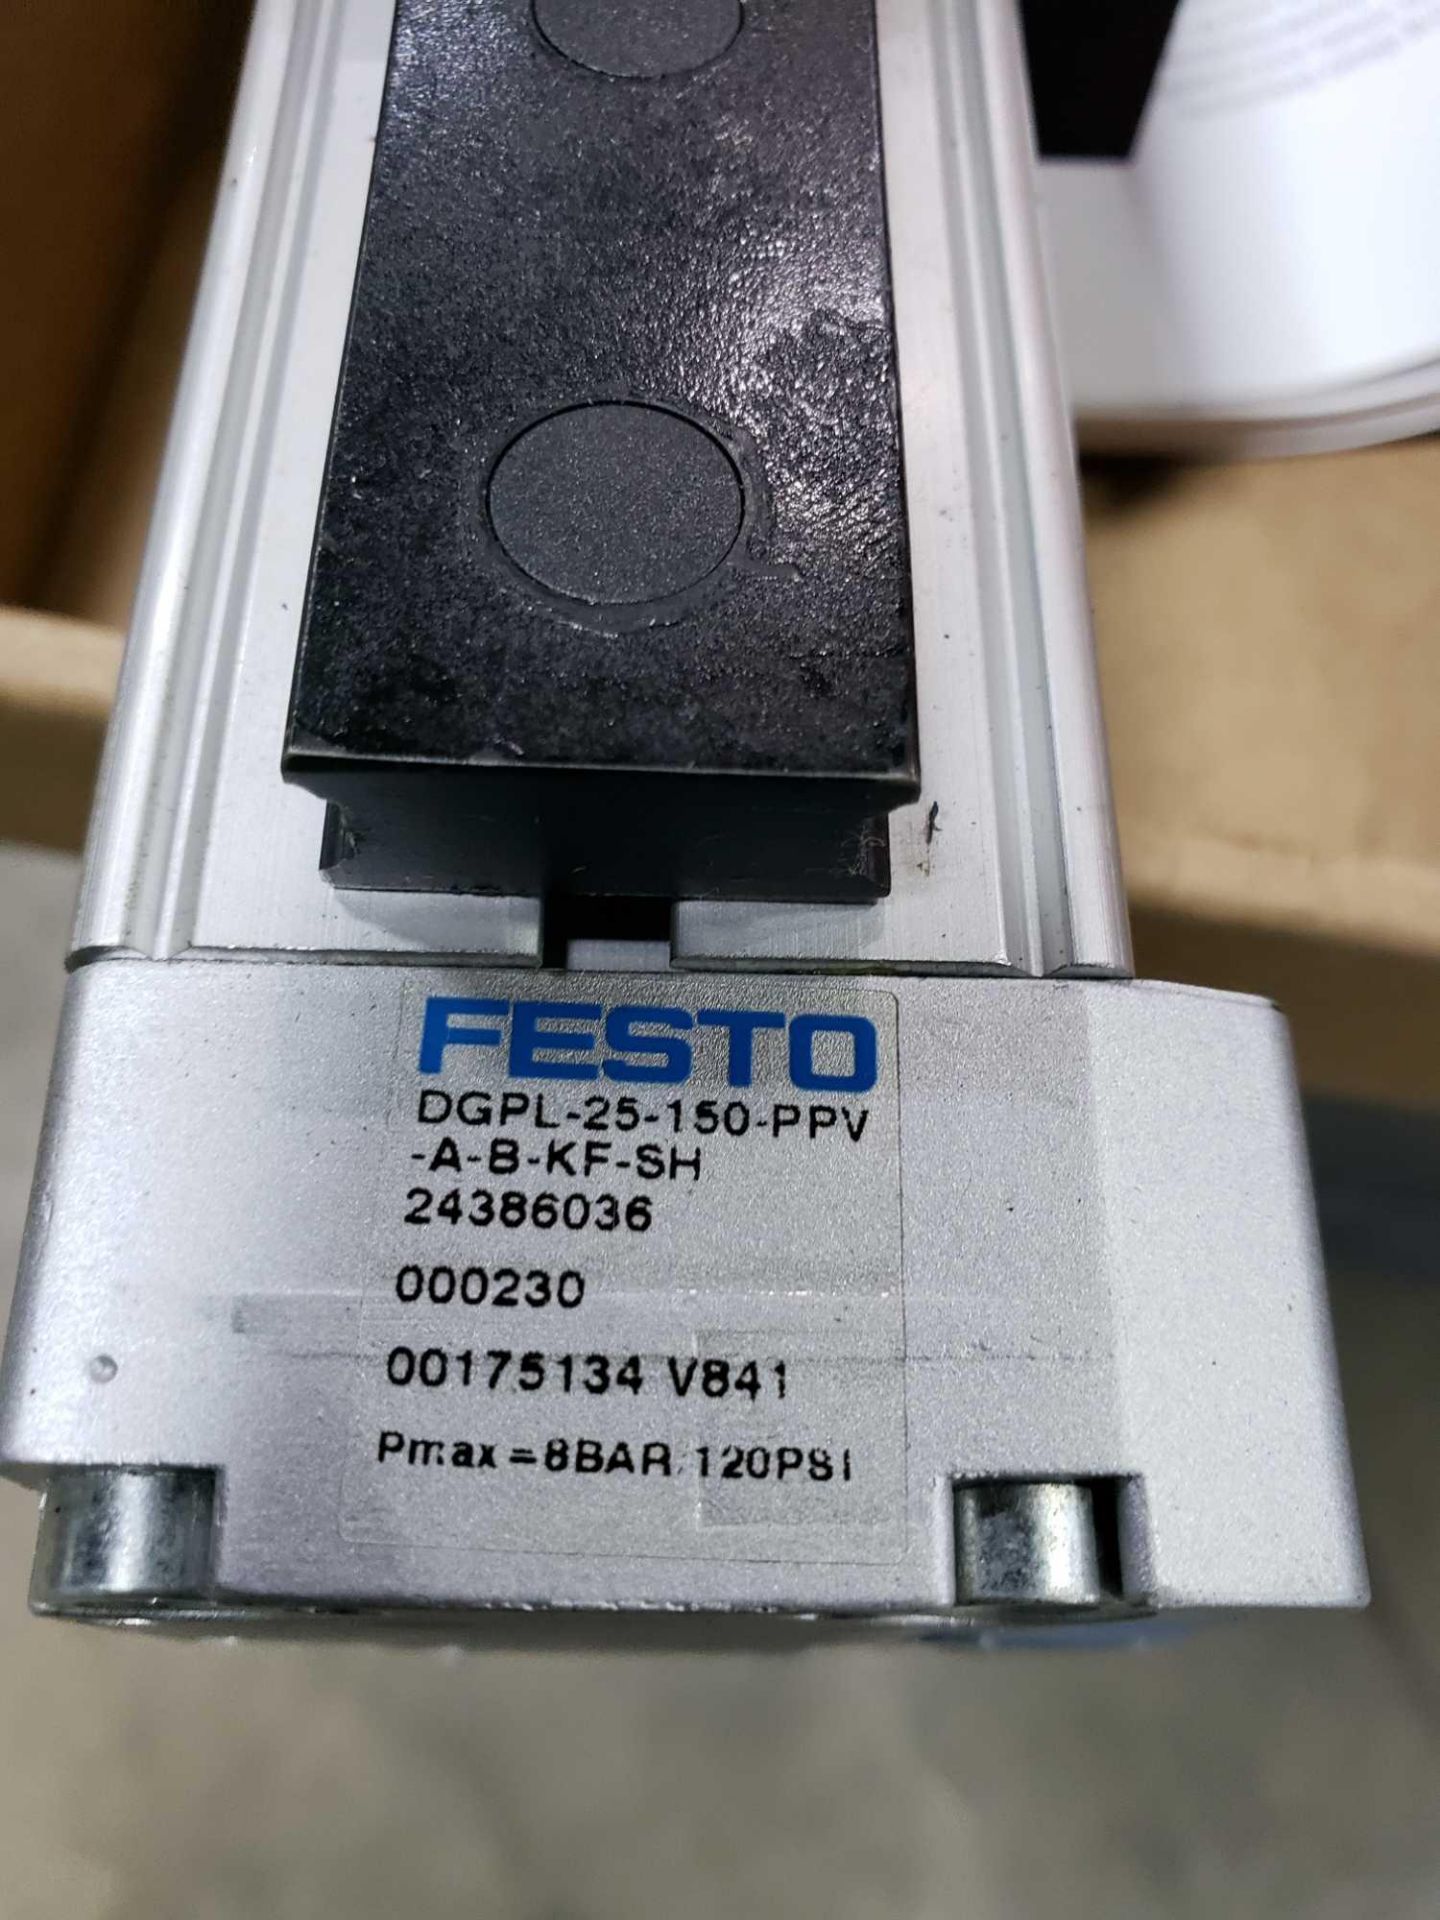 Festo model DGPL-25-150-PPV pneumatic actuator. New as pictured. - Image 2 of 2